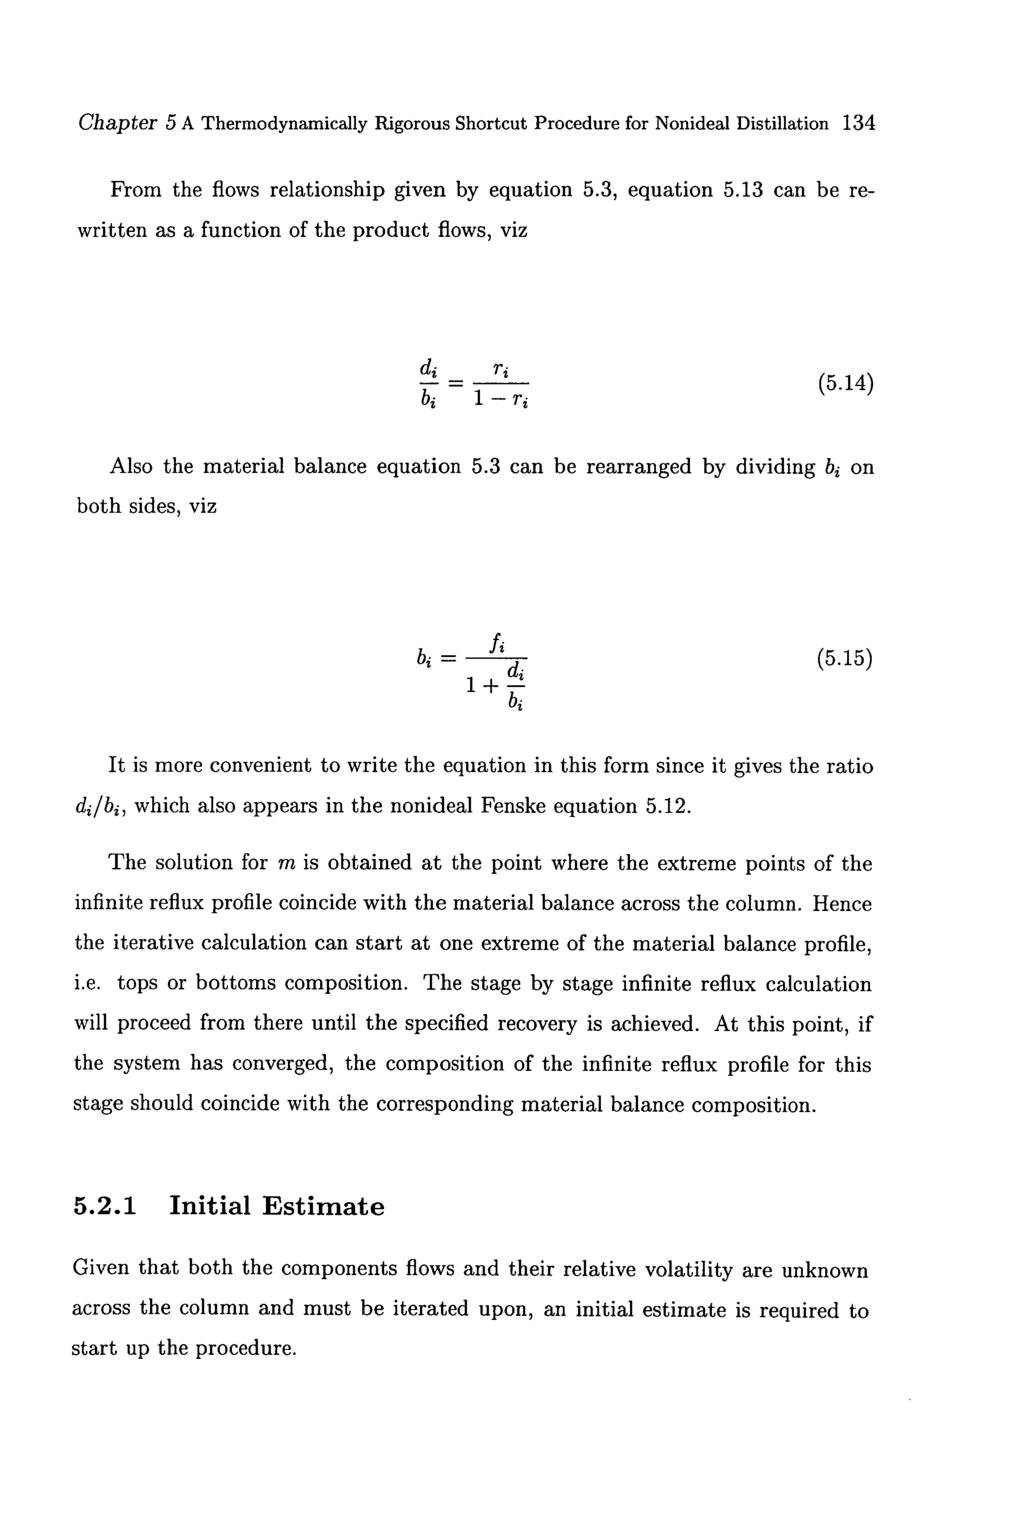 Chapter 5 A Thermodynamically Rigorous Shortcut Procedure for Nonideal Distillation 134 From the flows relationship given by equation 5.3, equation 5.